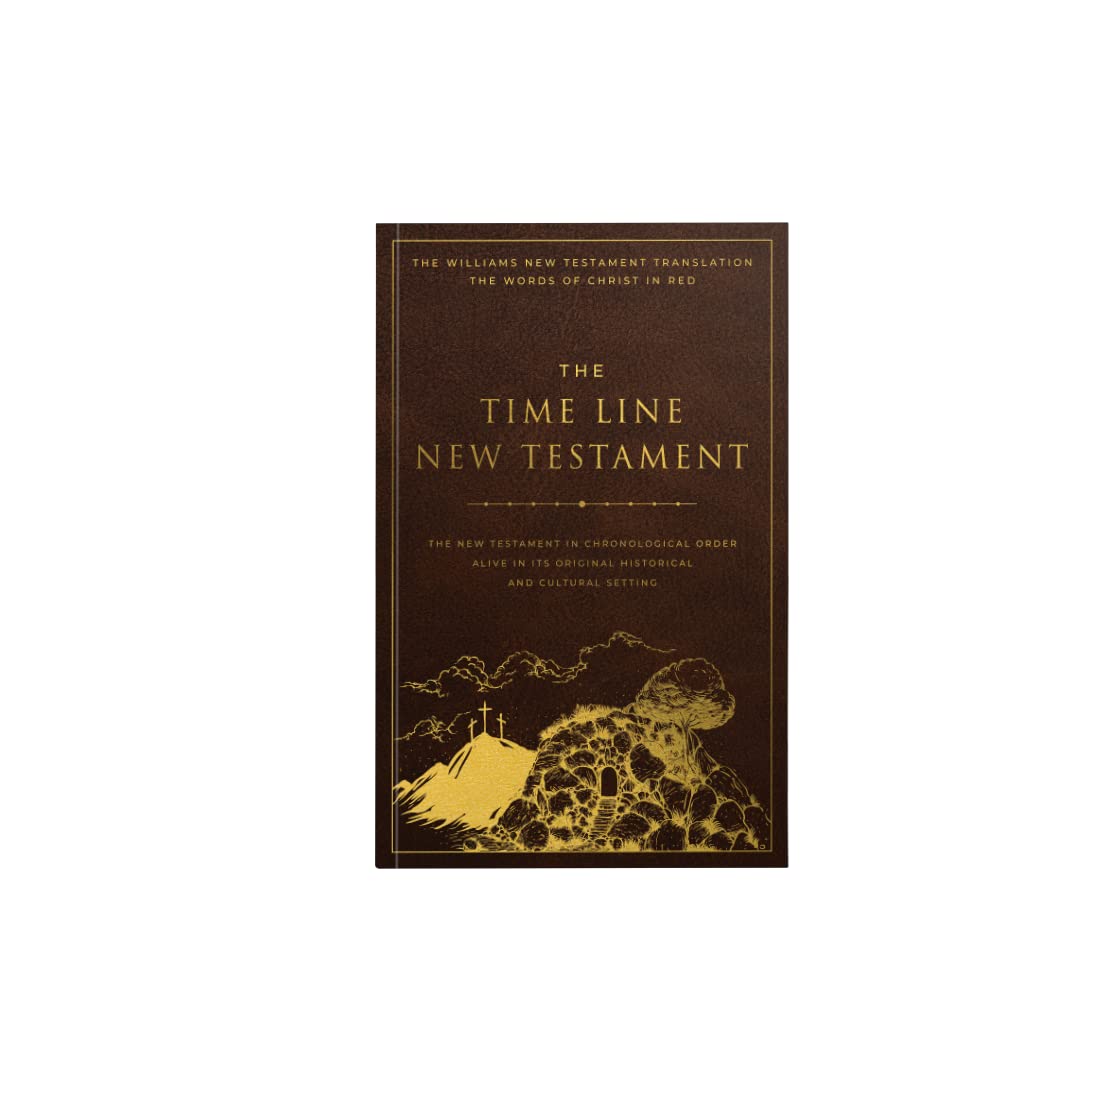 The Time Line New Testament Bible